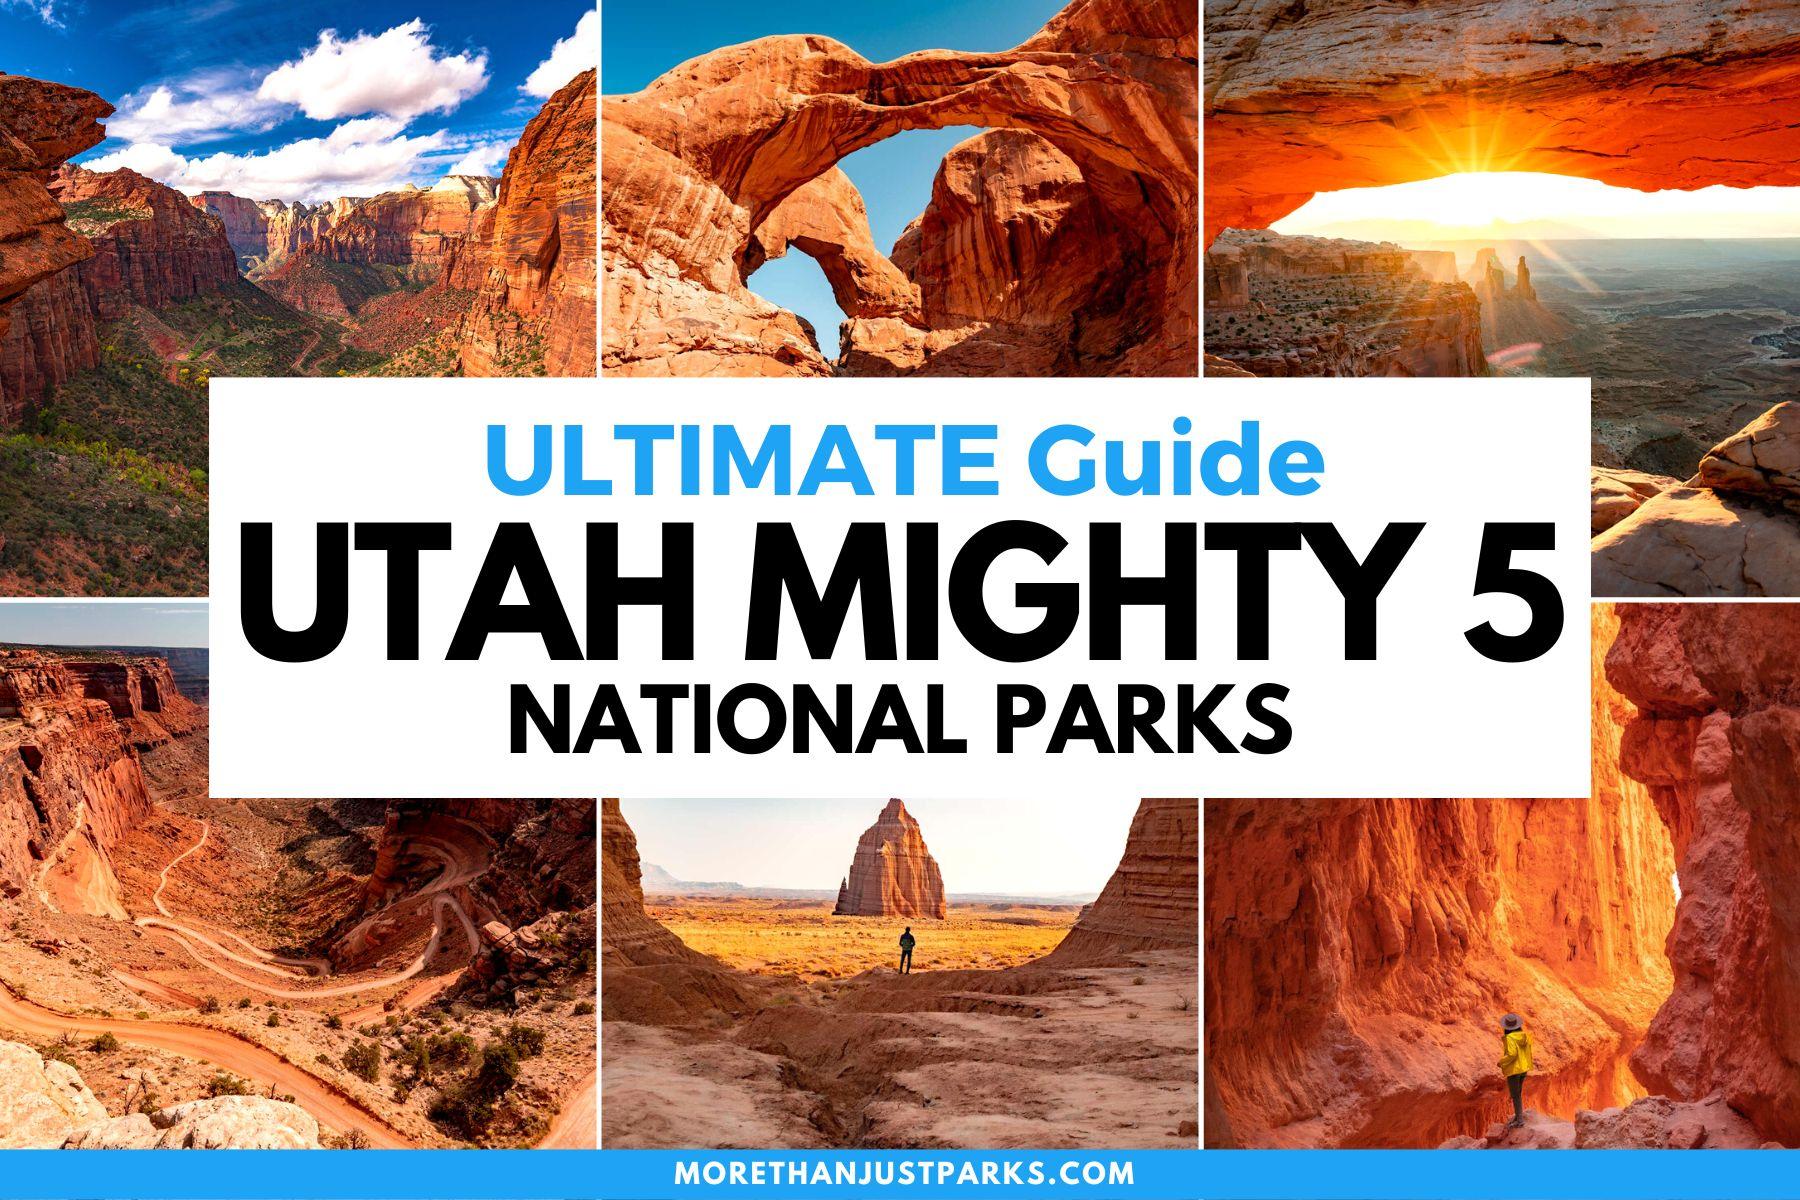 UTAH NATIONAL PARKS (The Mighty 5)